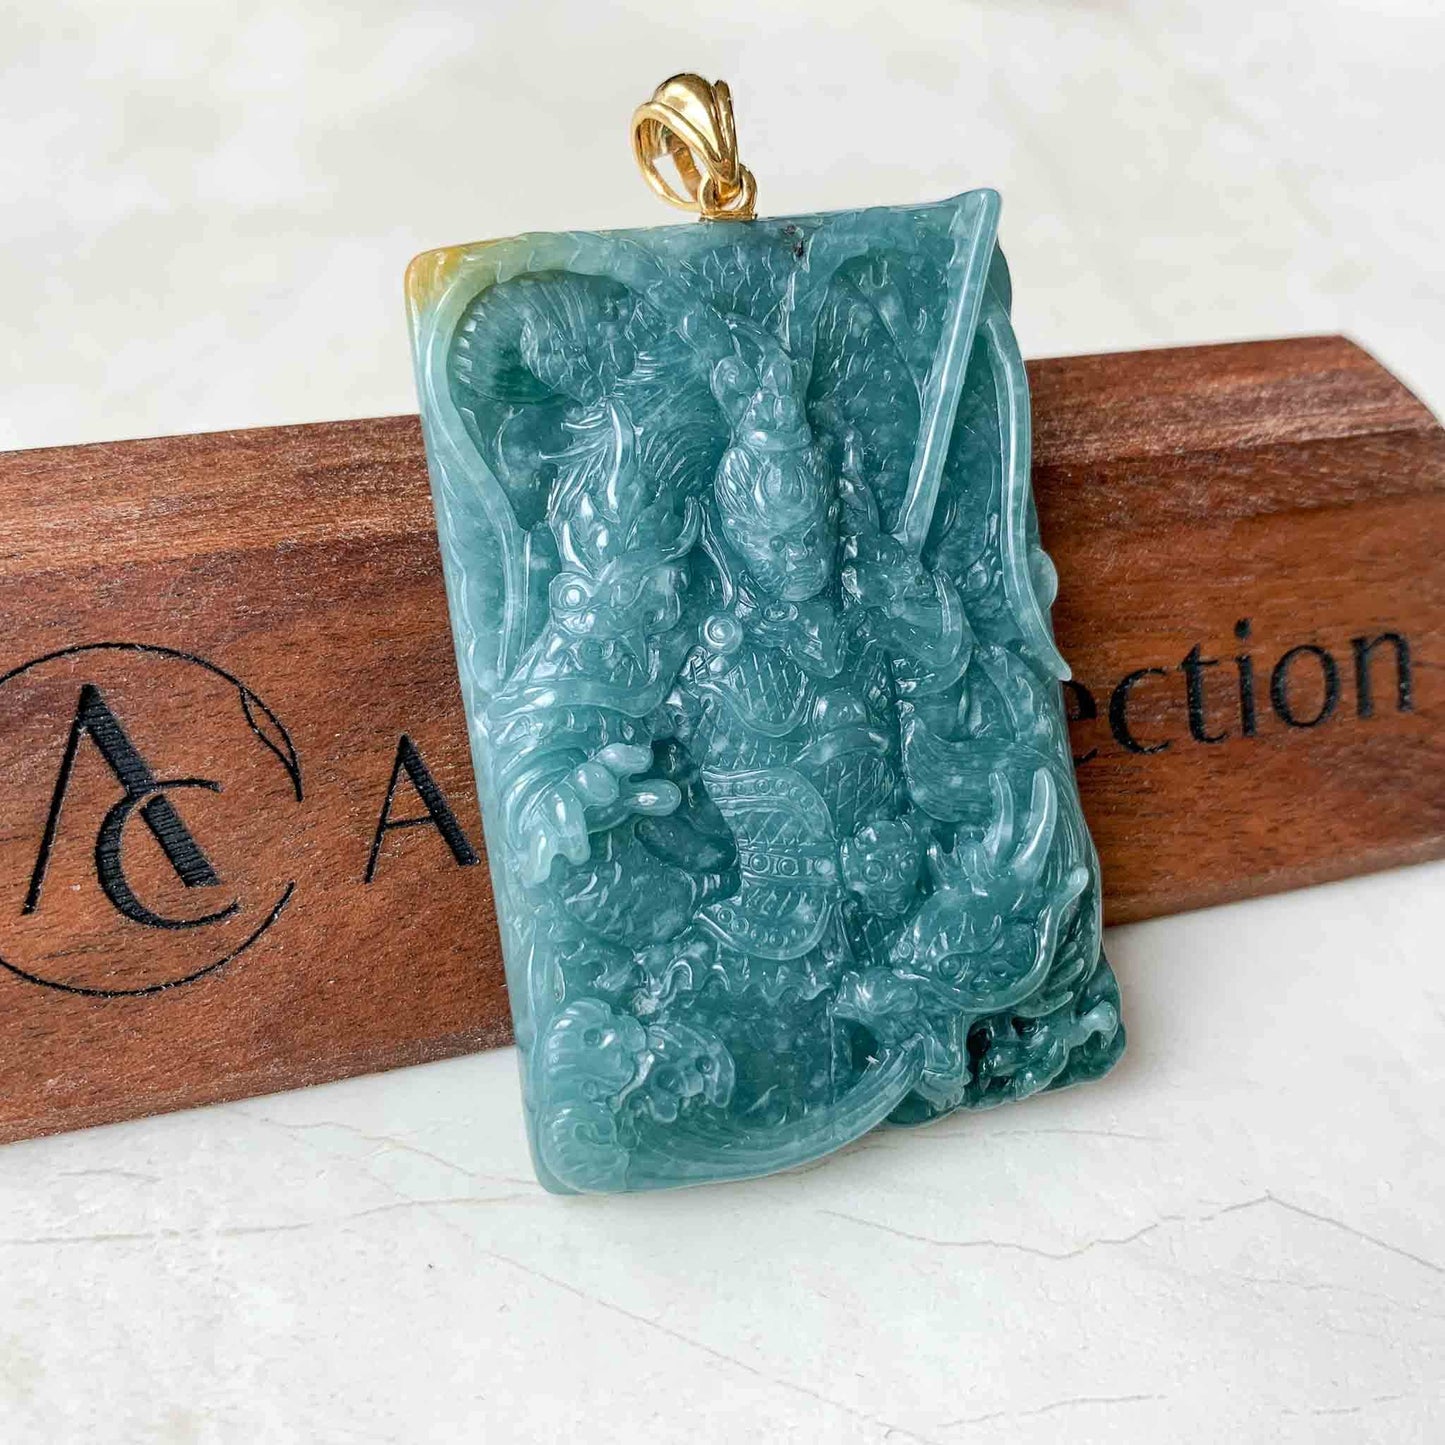 Blue Green Jadeite Jade Monkey King with 18K Gold Pendant, Sun Wu Kong, 孙悟空, Front Side Carving, Chinese Zodiac Carved, XZG-0423-1690338745